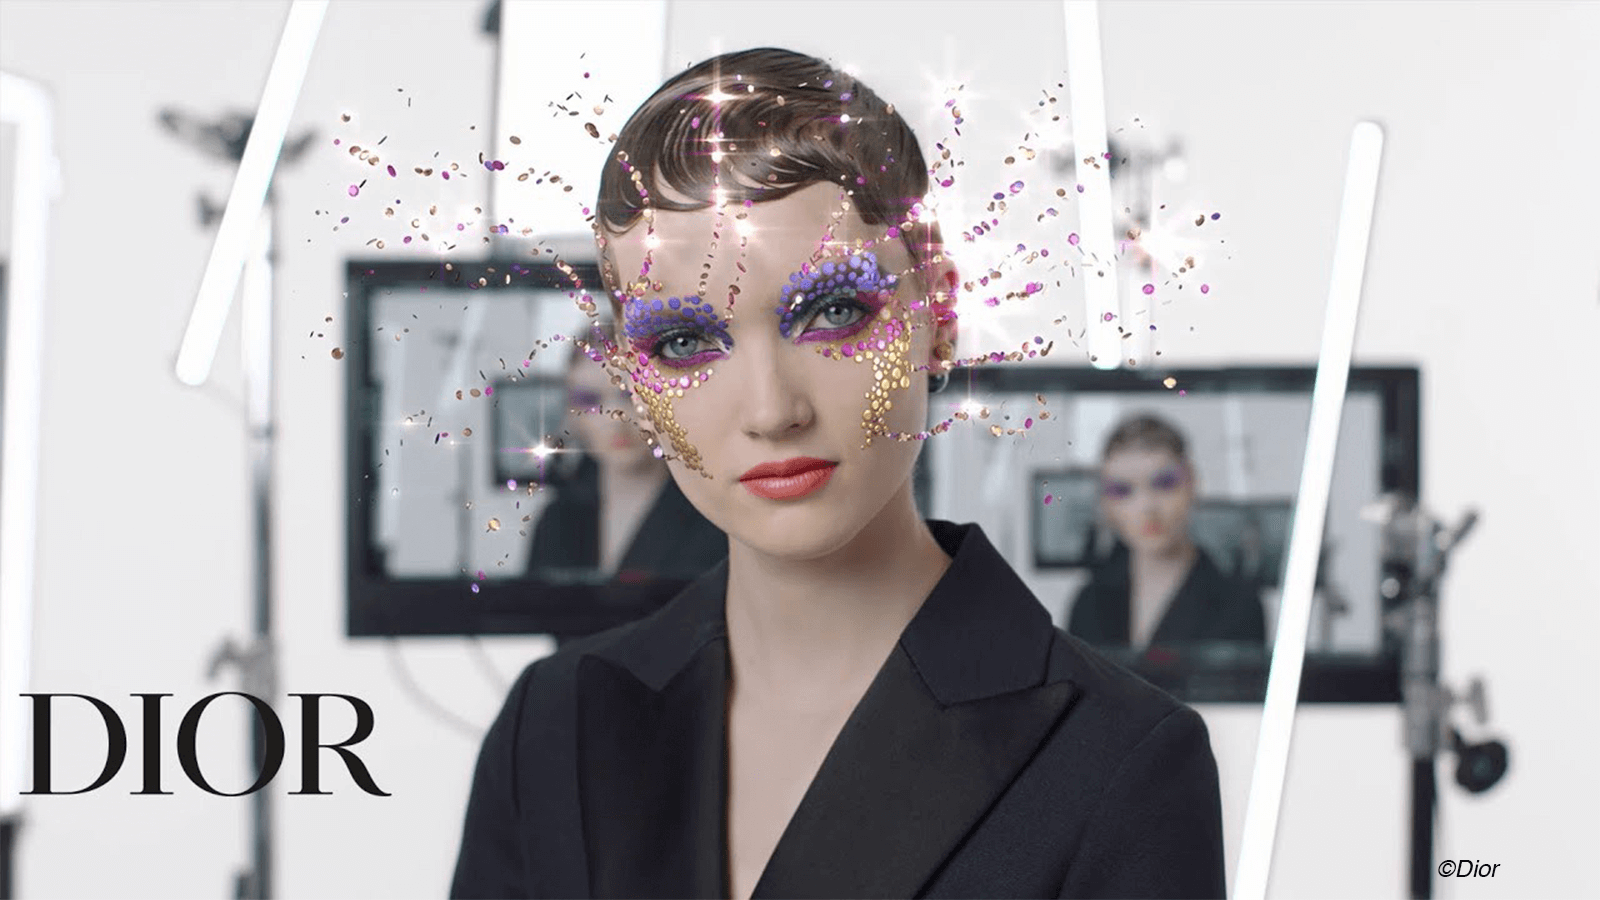 https://adobomagazine.com/digital-news/digital-dior-makeup-works-with-mnstr-to-explore-the-future-of-beauty-with-an-instagram-ar-filter/